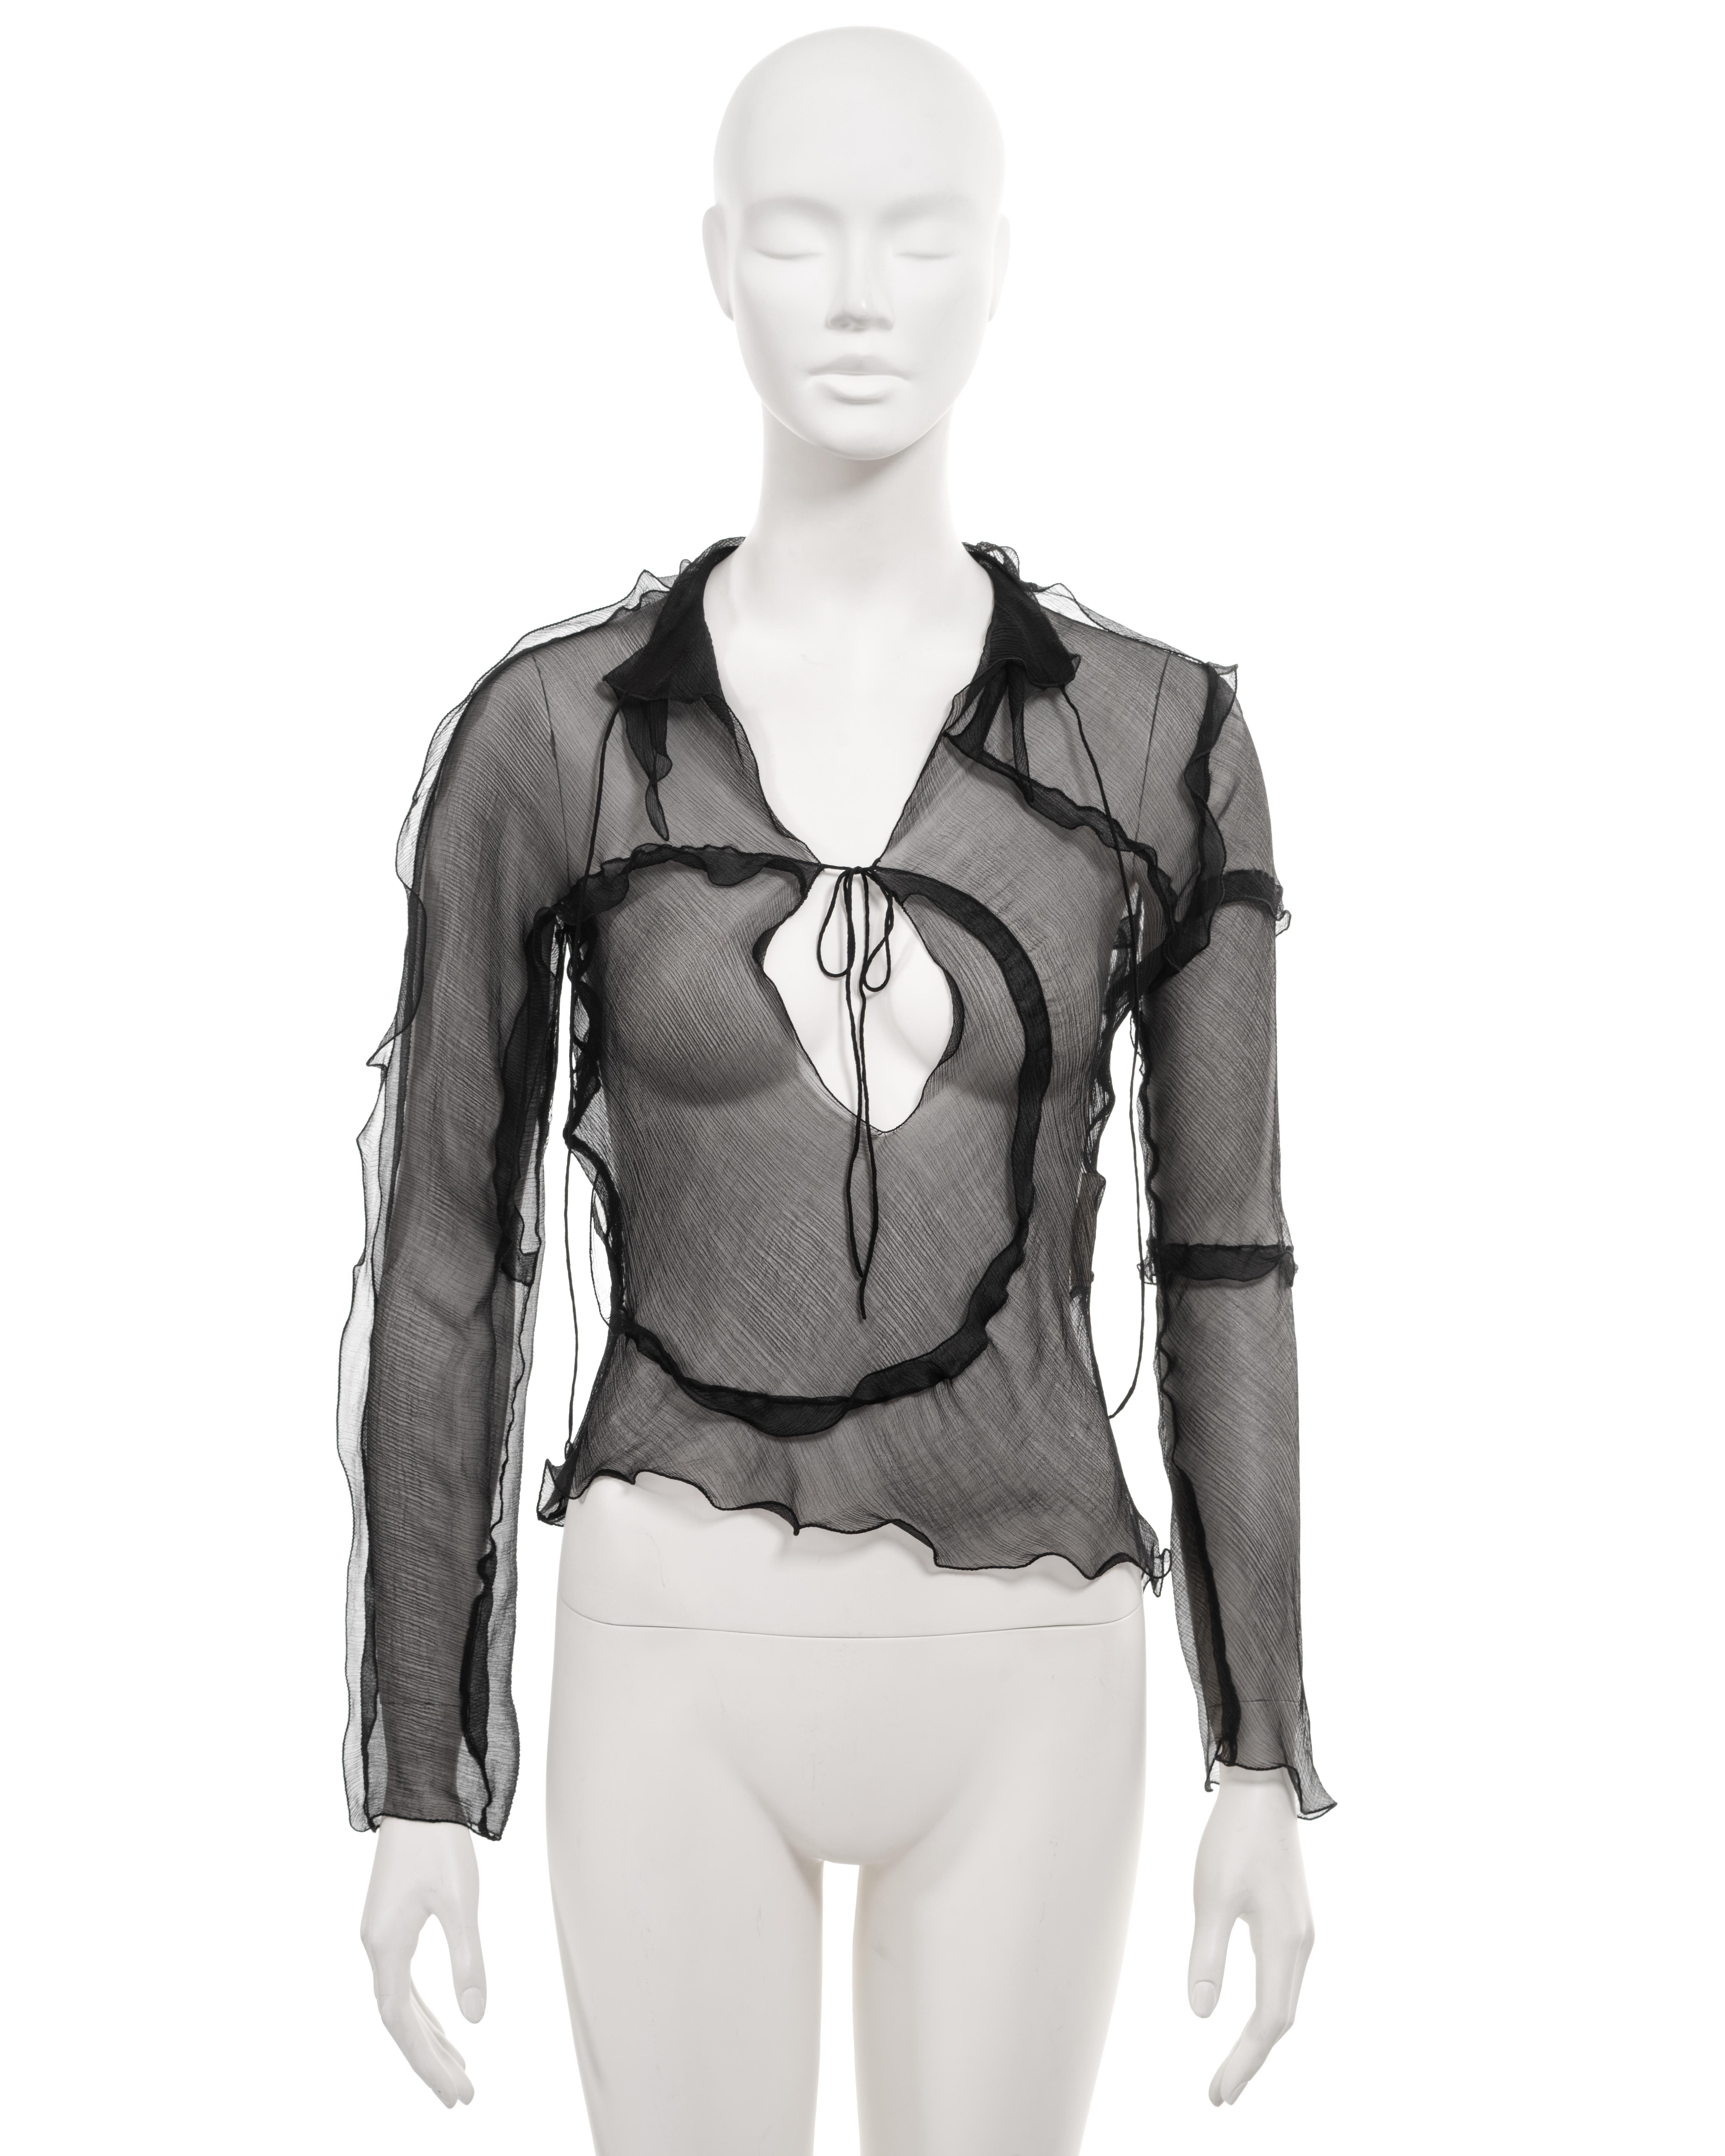 ▪ Fendi archival blouse
▪ Creative Director: Karl Lagerfeld
▪ Sold by One of a Kind Archive
▪ Spring-Summer 2000
▪ Constructed from bias-cut black crinkled silk chiffon
▪ Ruffled trim
▪ Multi-panelled 
▪ String ties fastening at the collar and chest